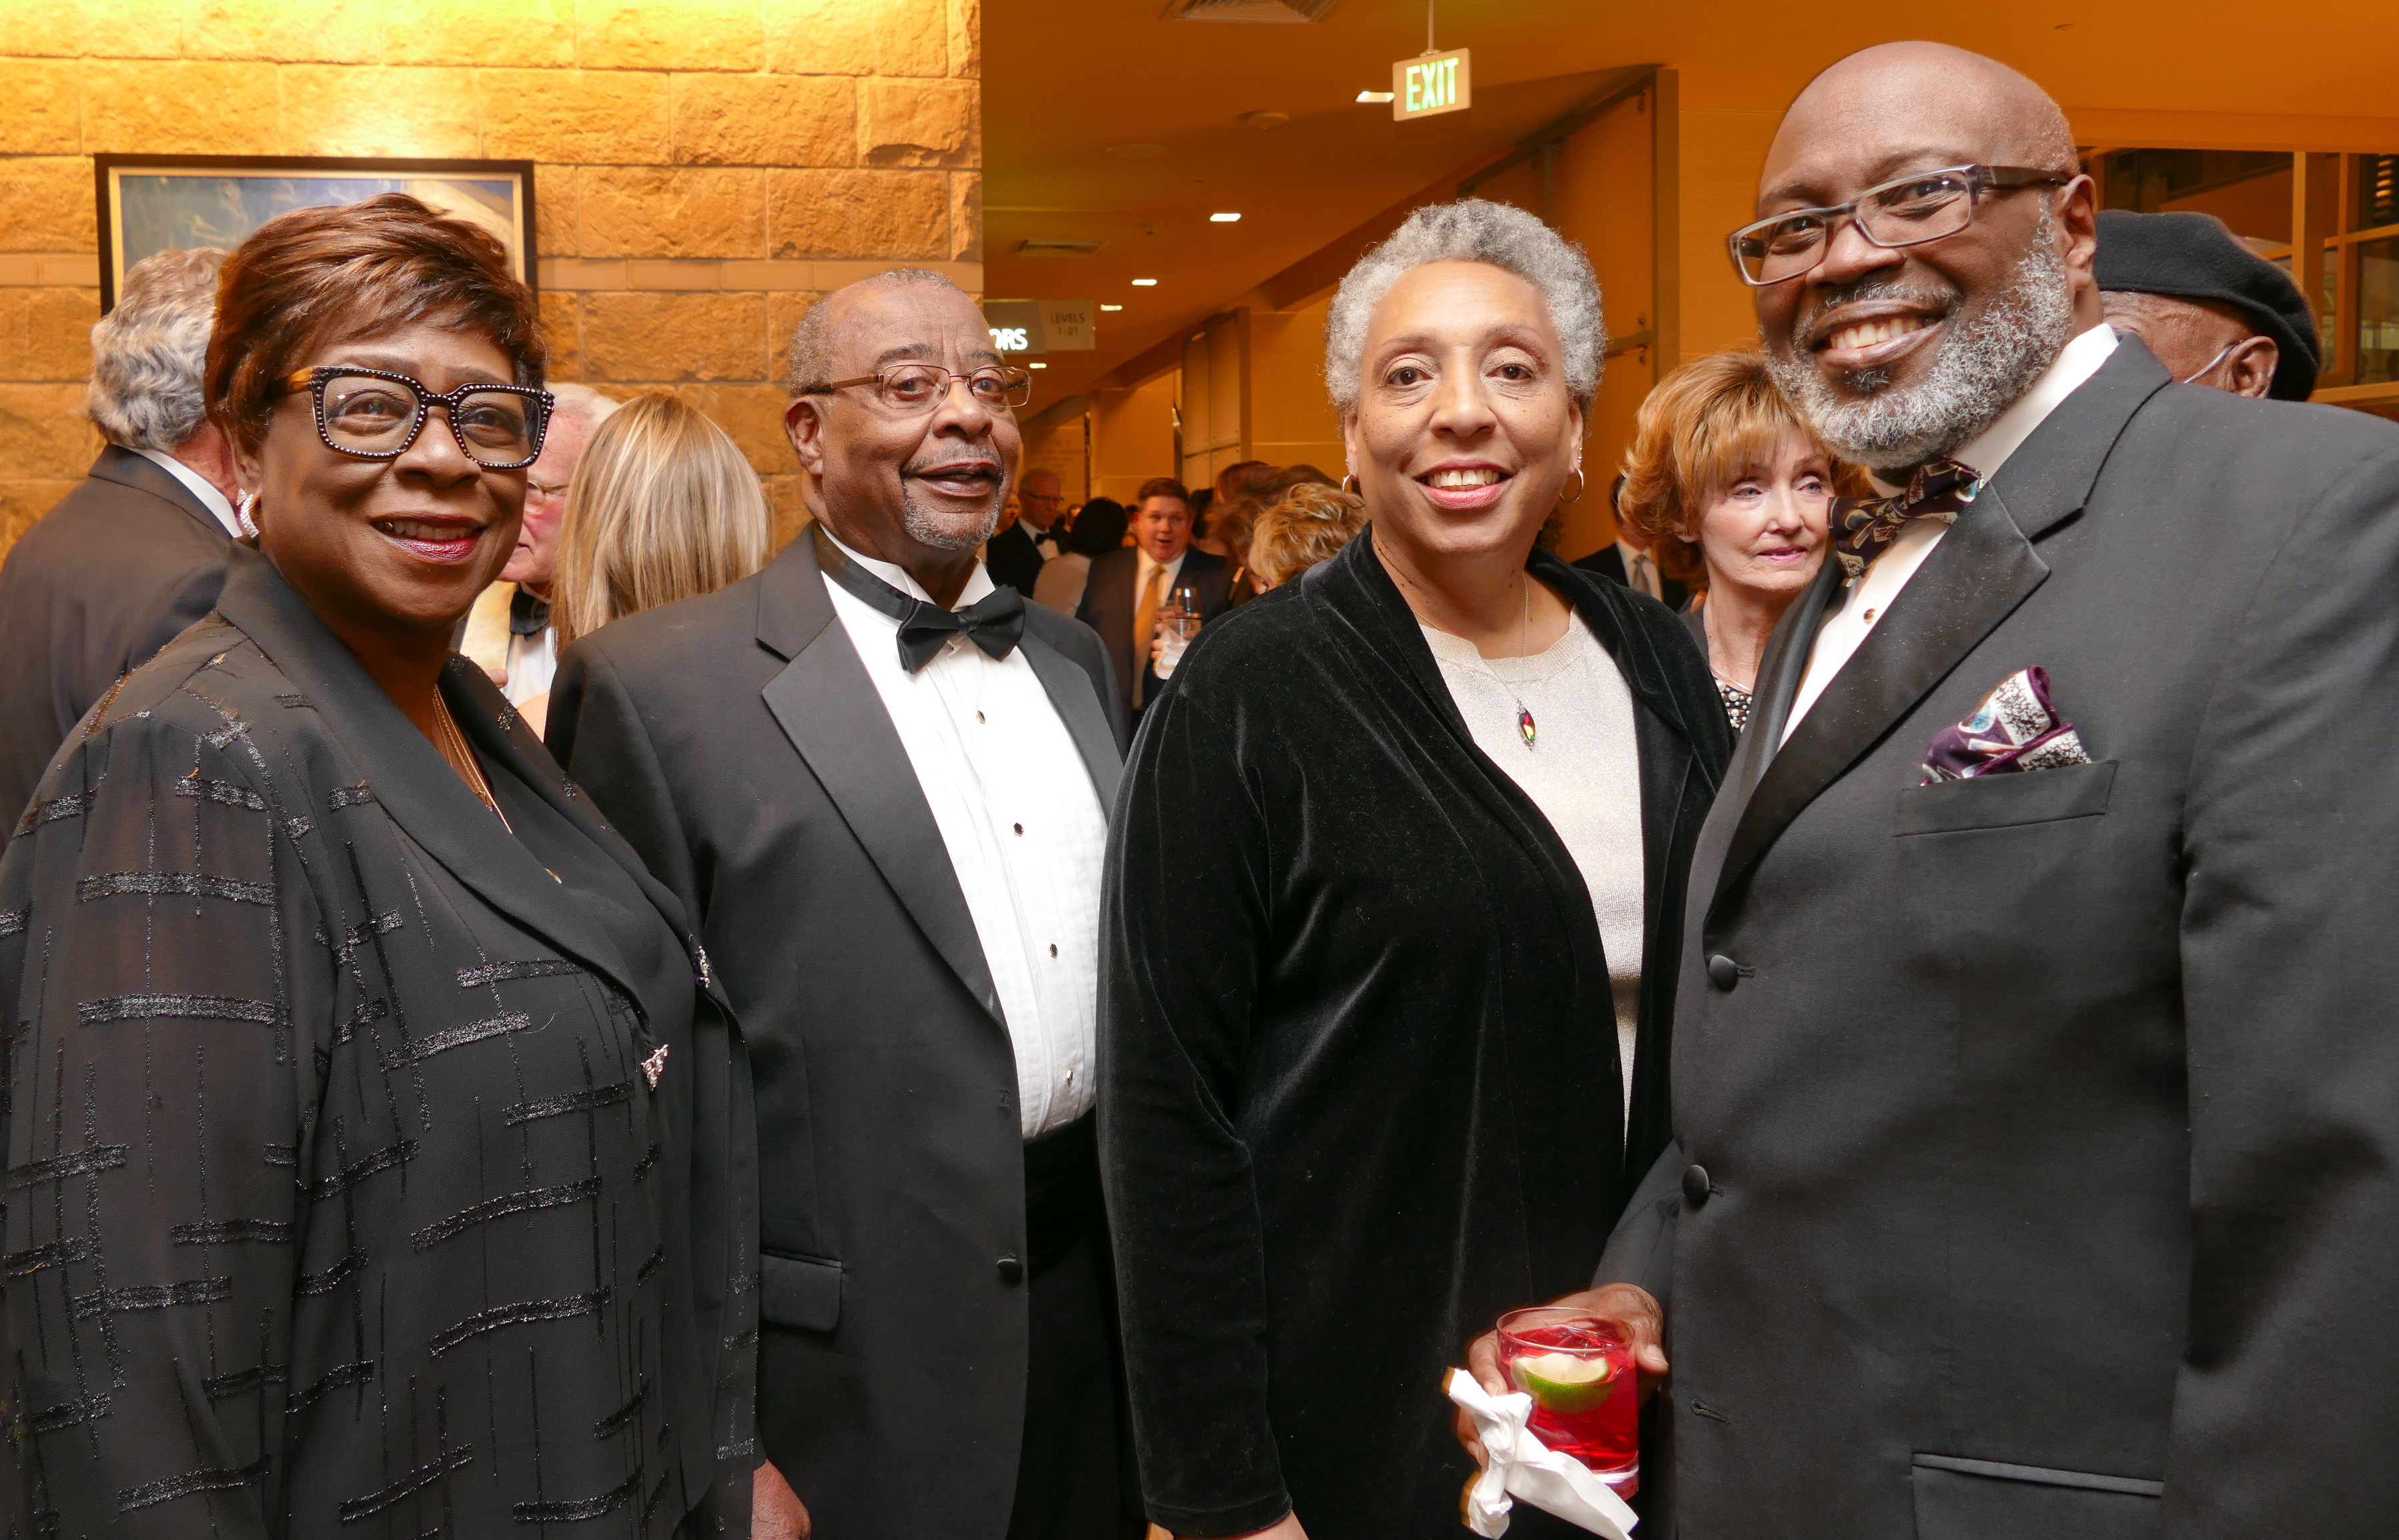 Linda Bates Leali and Charles Leali, left, with Terri and Dwight Gentry